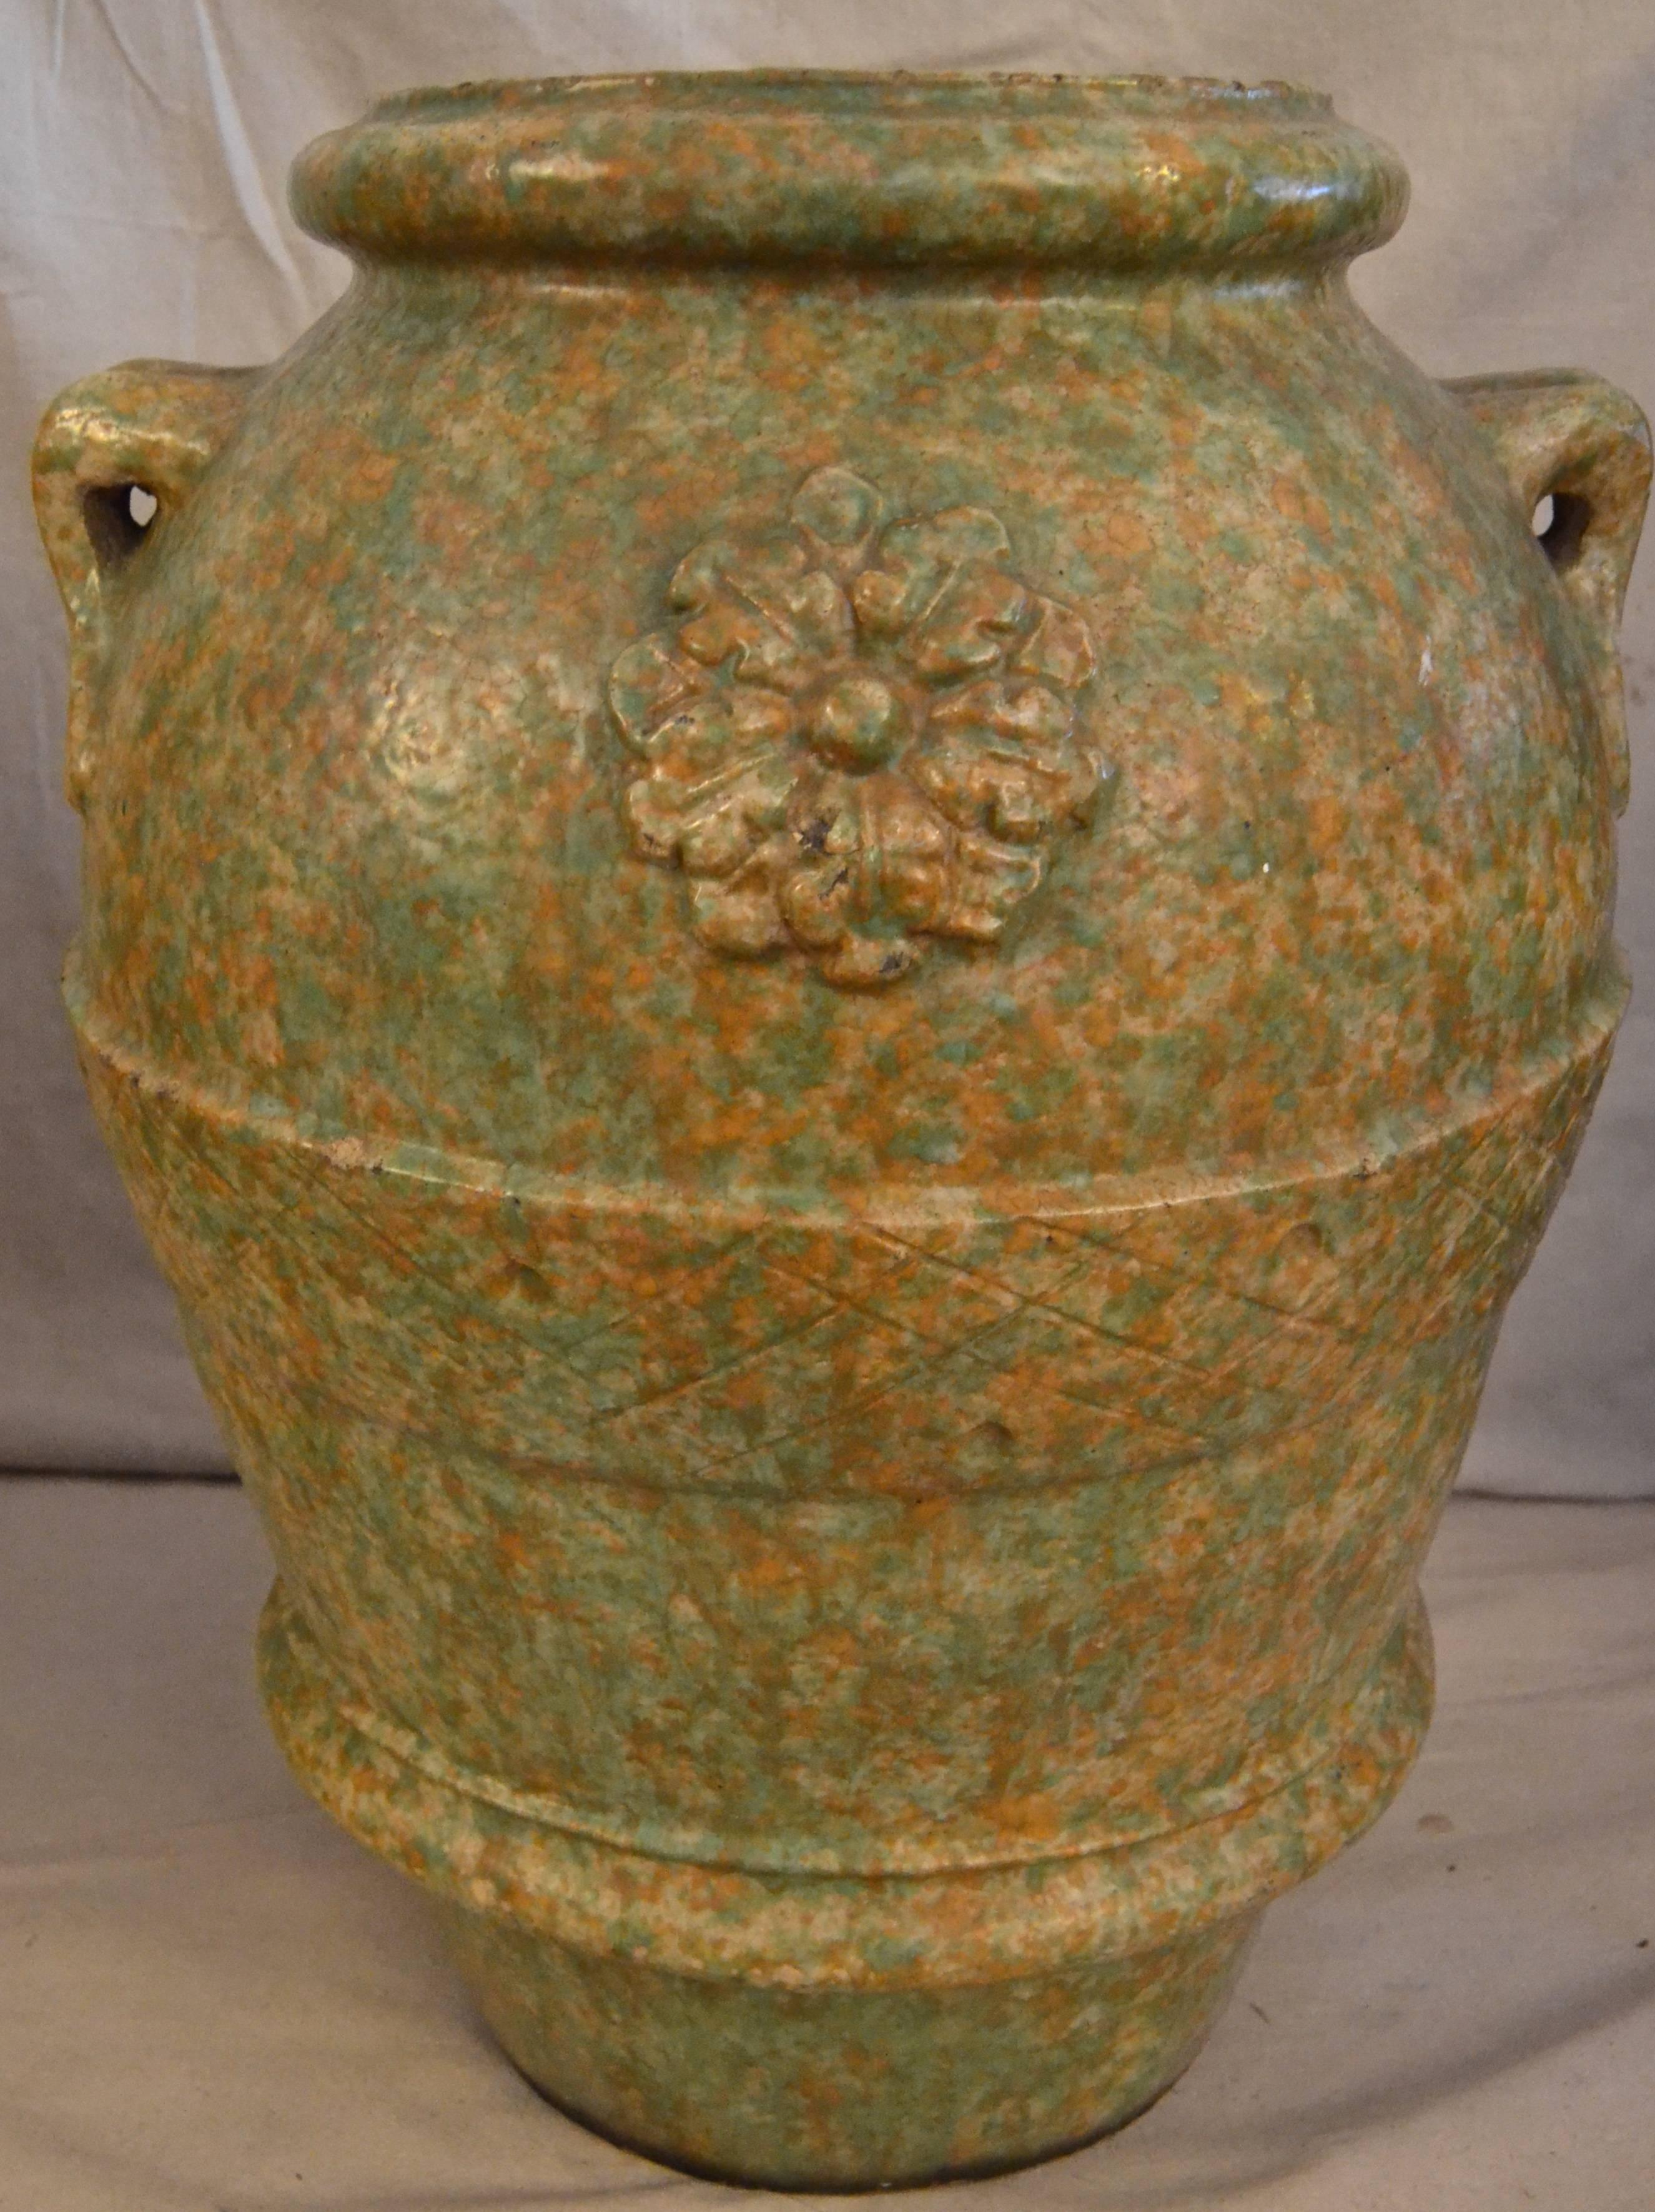 Pair of glazed pottery floor or garden urns from a Philadelphia estate. Wonderfully rich mottled glaze with incised decoration, relief rosettes and applied handles. Unsigned but attributed to Galloway Pottery. Great form, glaze and large-scale make